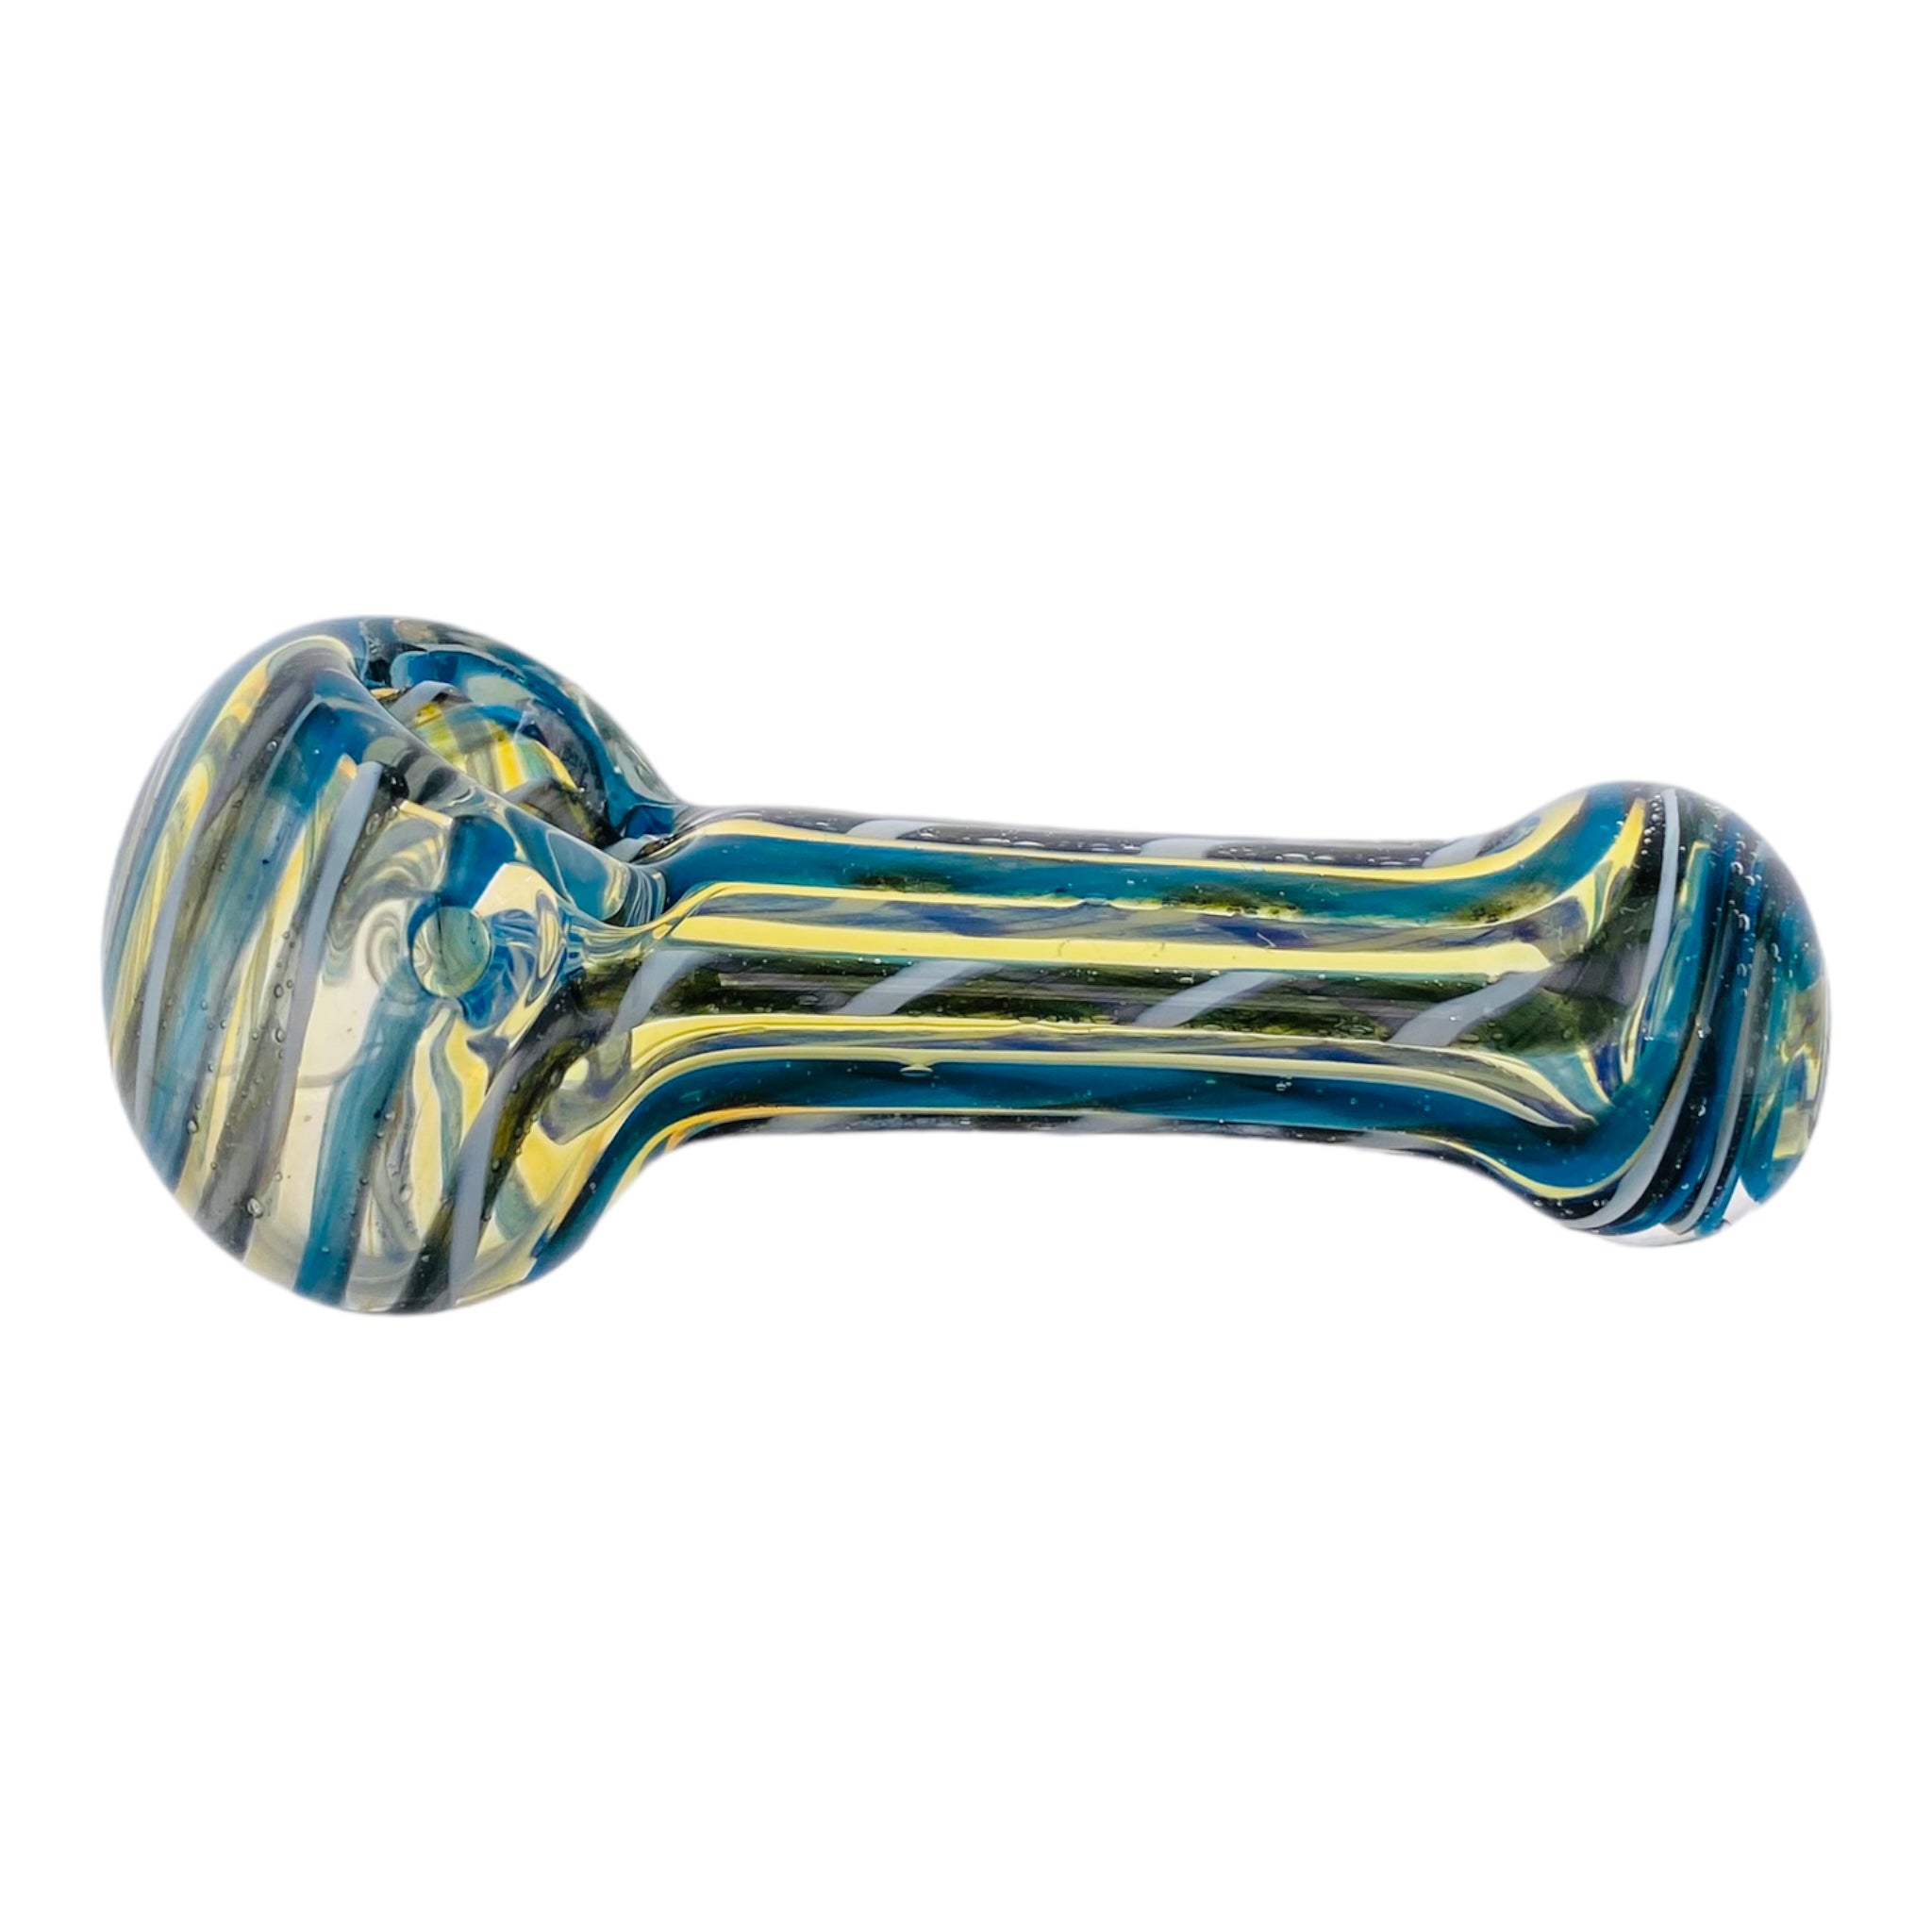 Basic Glass Spoon Pipe With Blue White And Black Linework